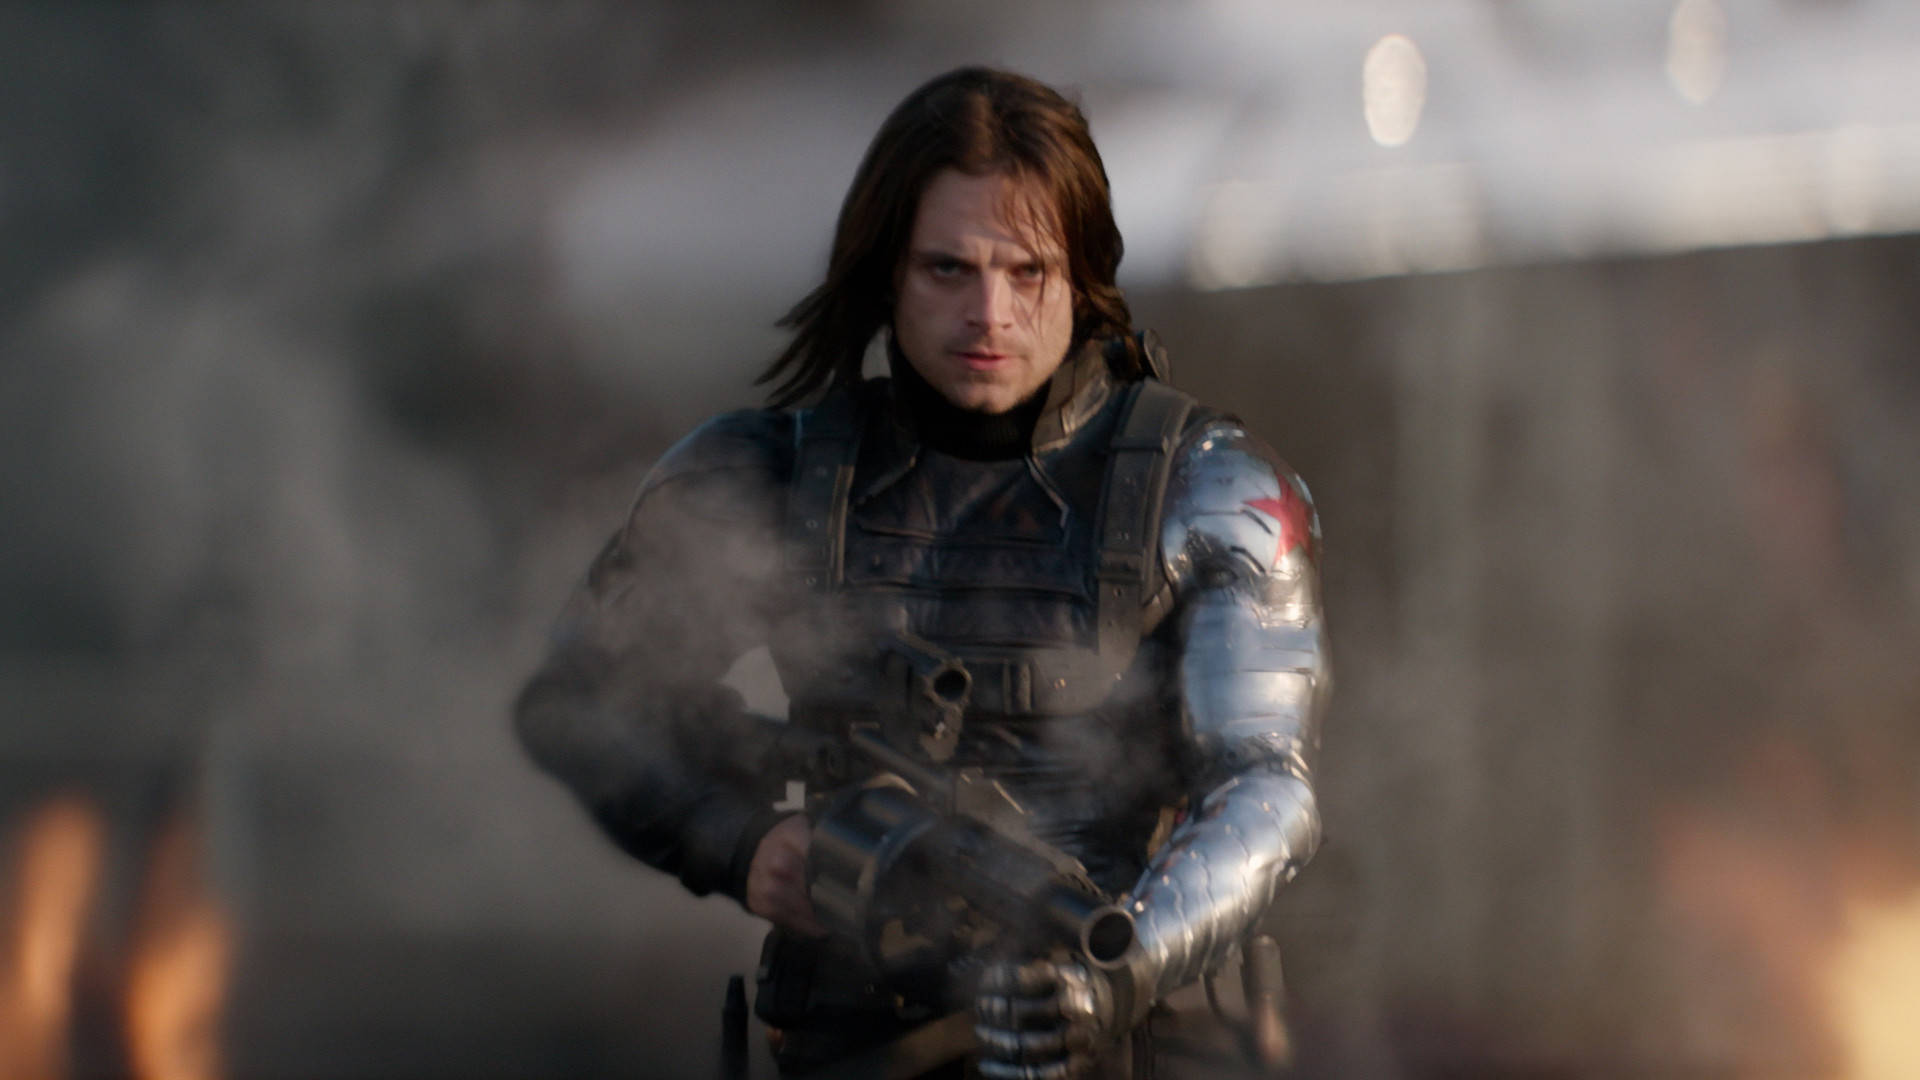 1920X1080 Winter Soldier Wallpaper and Background